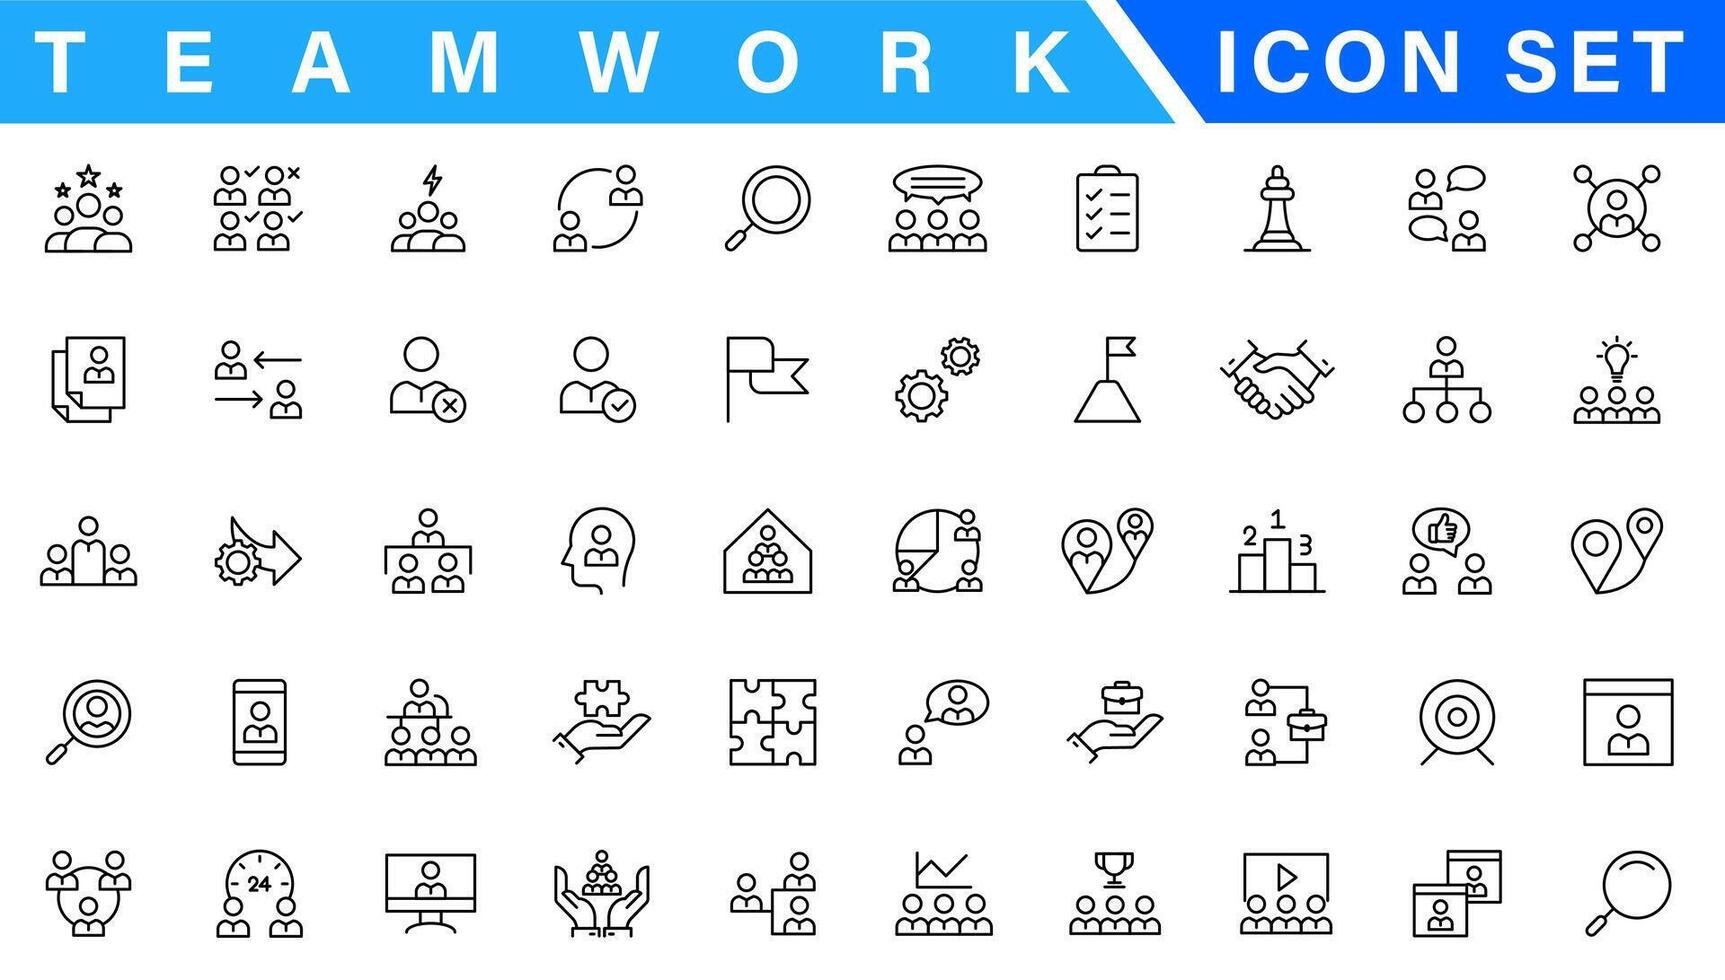 Business people line icons set. Businessman outline icons collection. Teamwork, human resources, meeting, partnership, meeting, work group, success, resume - stock vecto vector